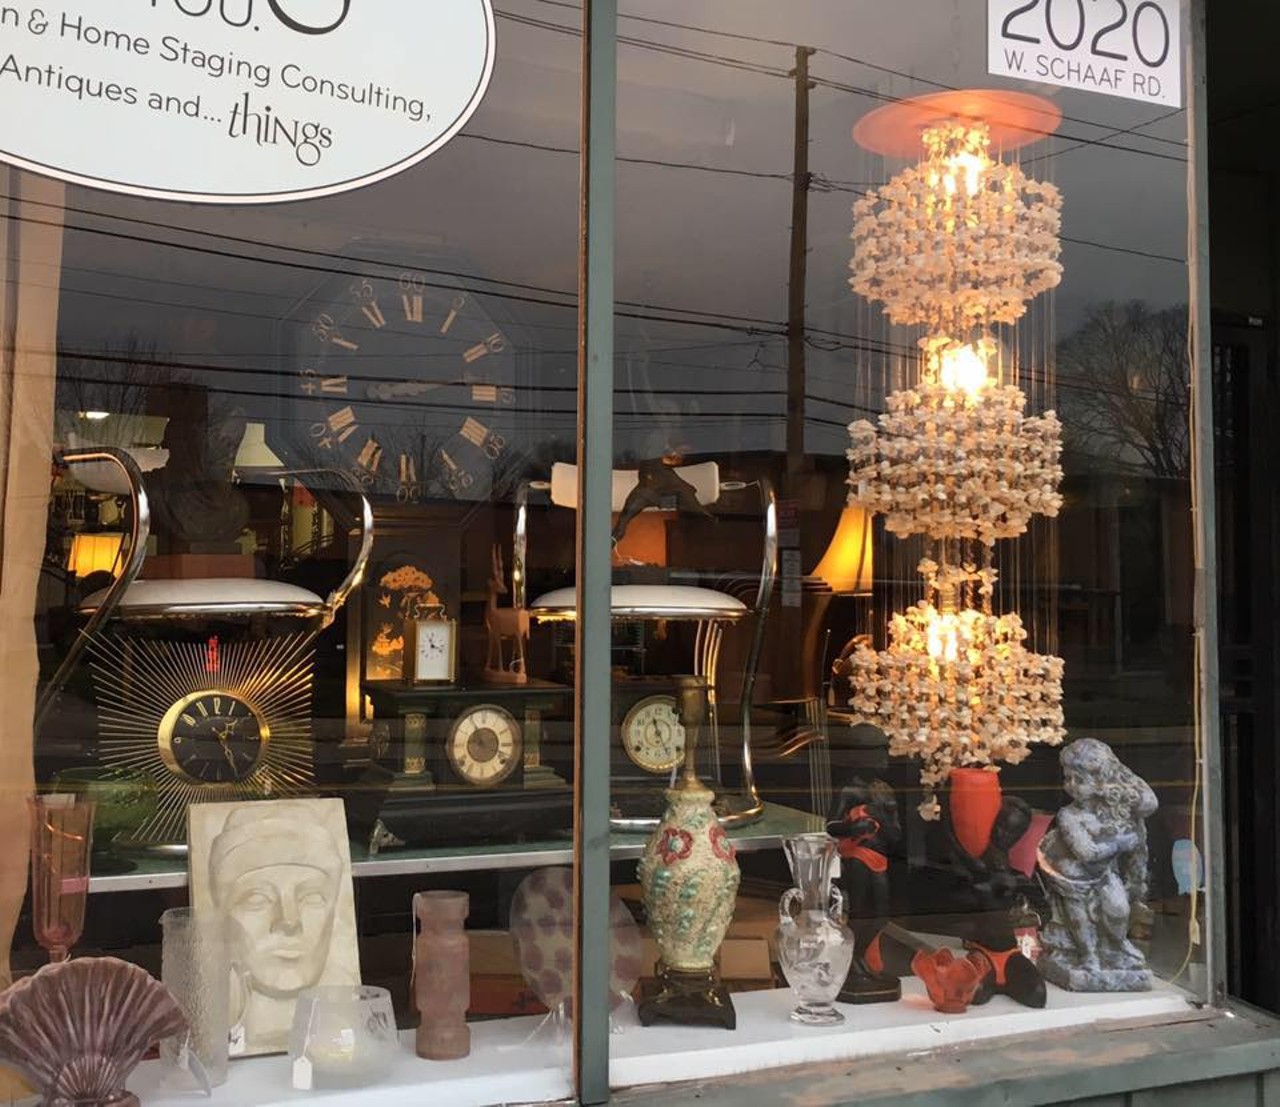 All Things For You
3910 Lorain Ave., Cleveland
This Ohio City shop specializes in awesome vintage collectibles, interior design, antiques and furniture from the mid 20th century. If you’re looking for a piece to accessorize your home or office, hit this spot up.